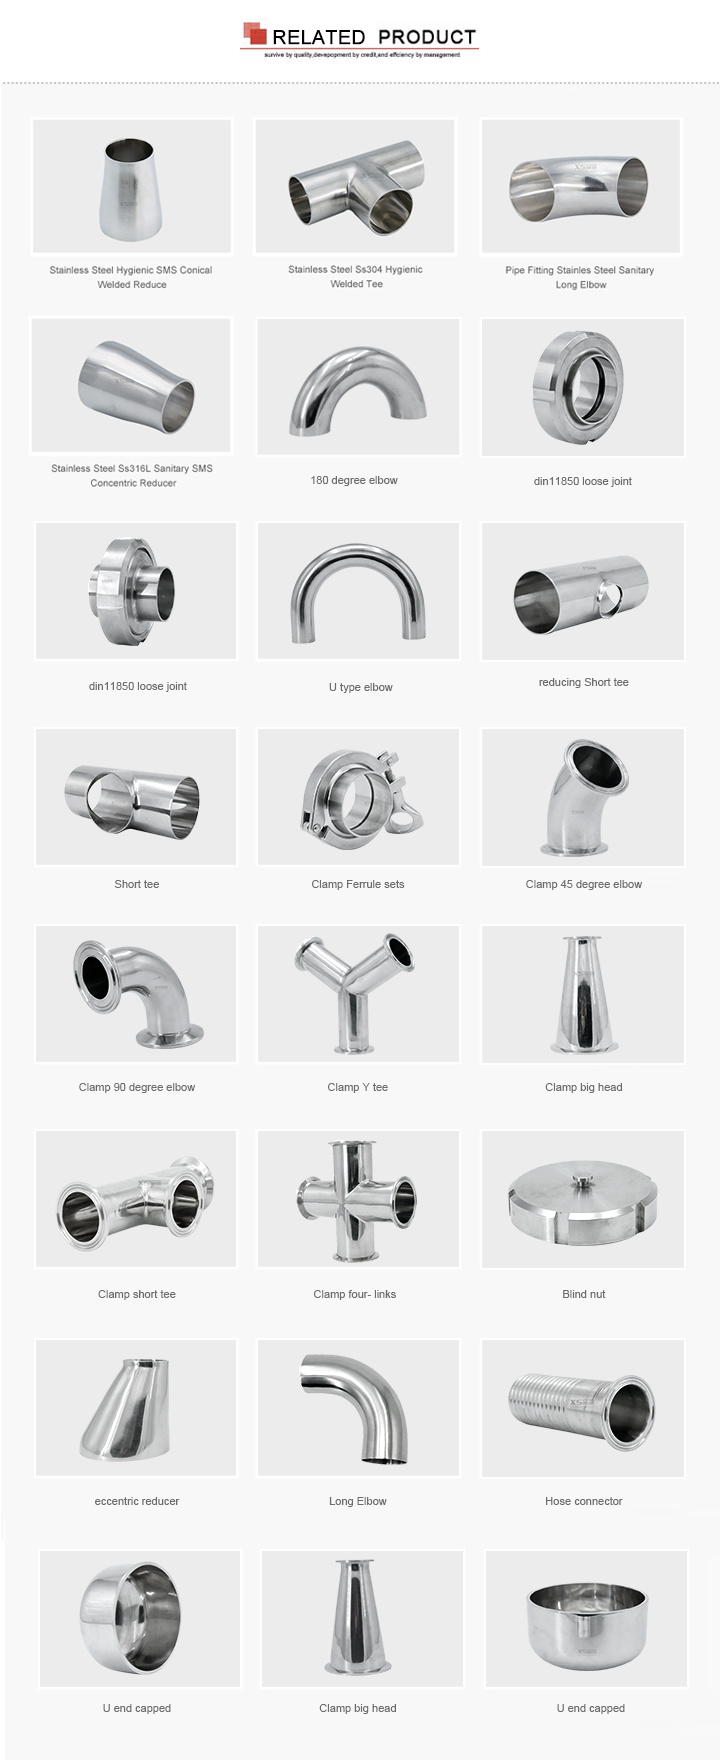 SMS Stainless Steel Hygienic Butt-Welded Reducing Tee Pipe Fittings